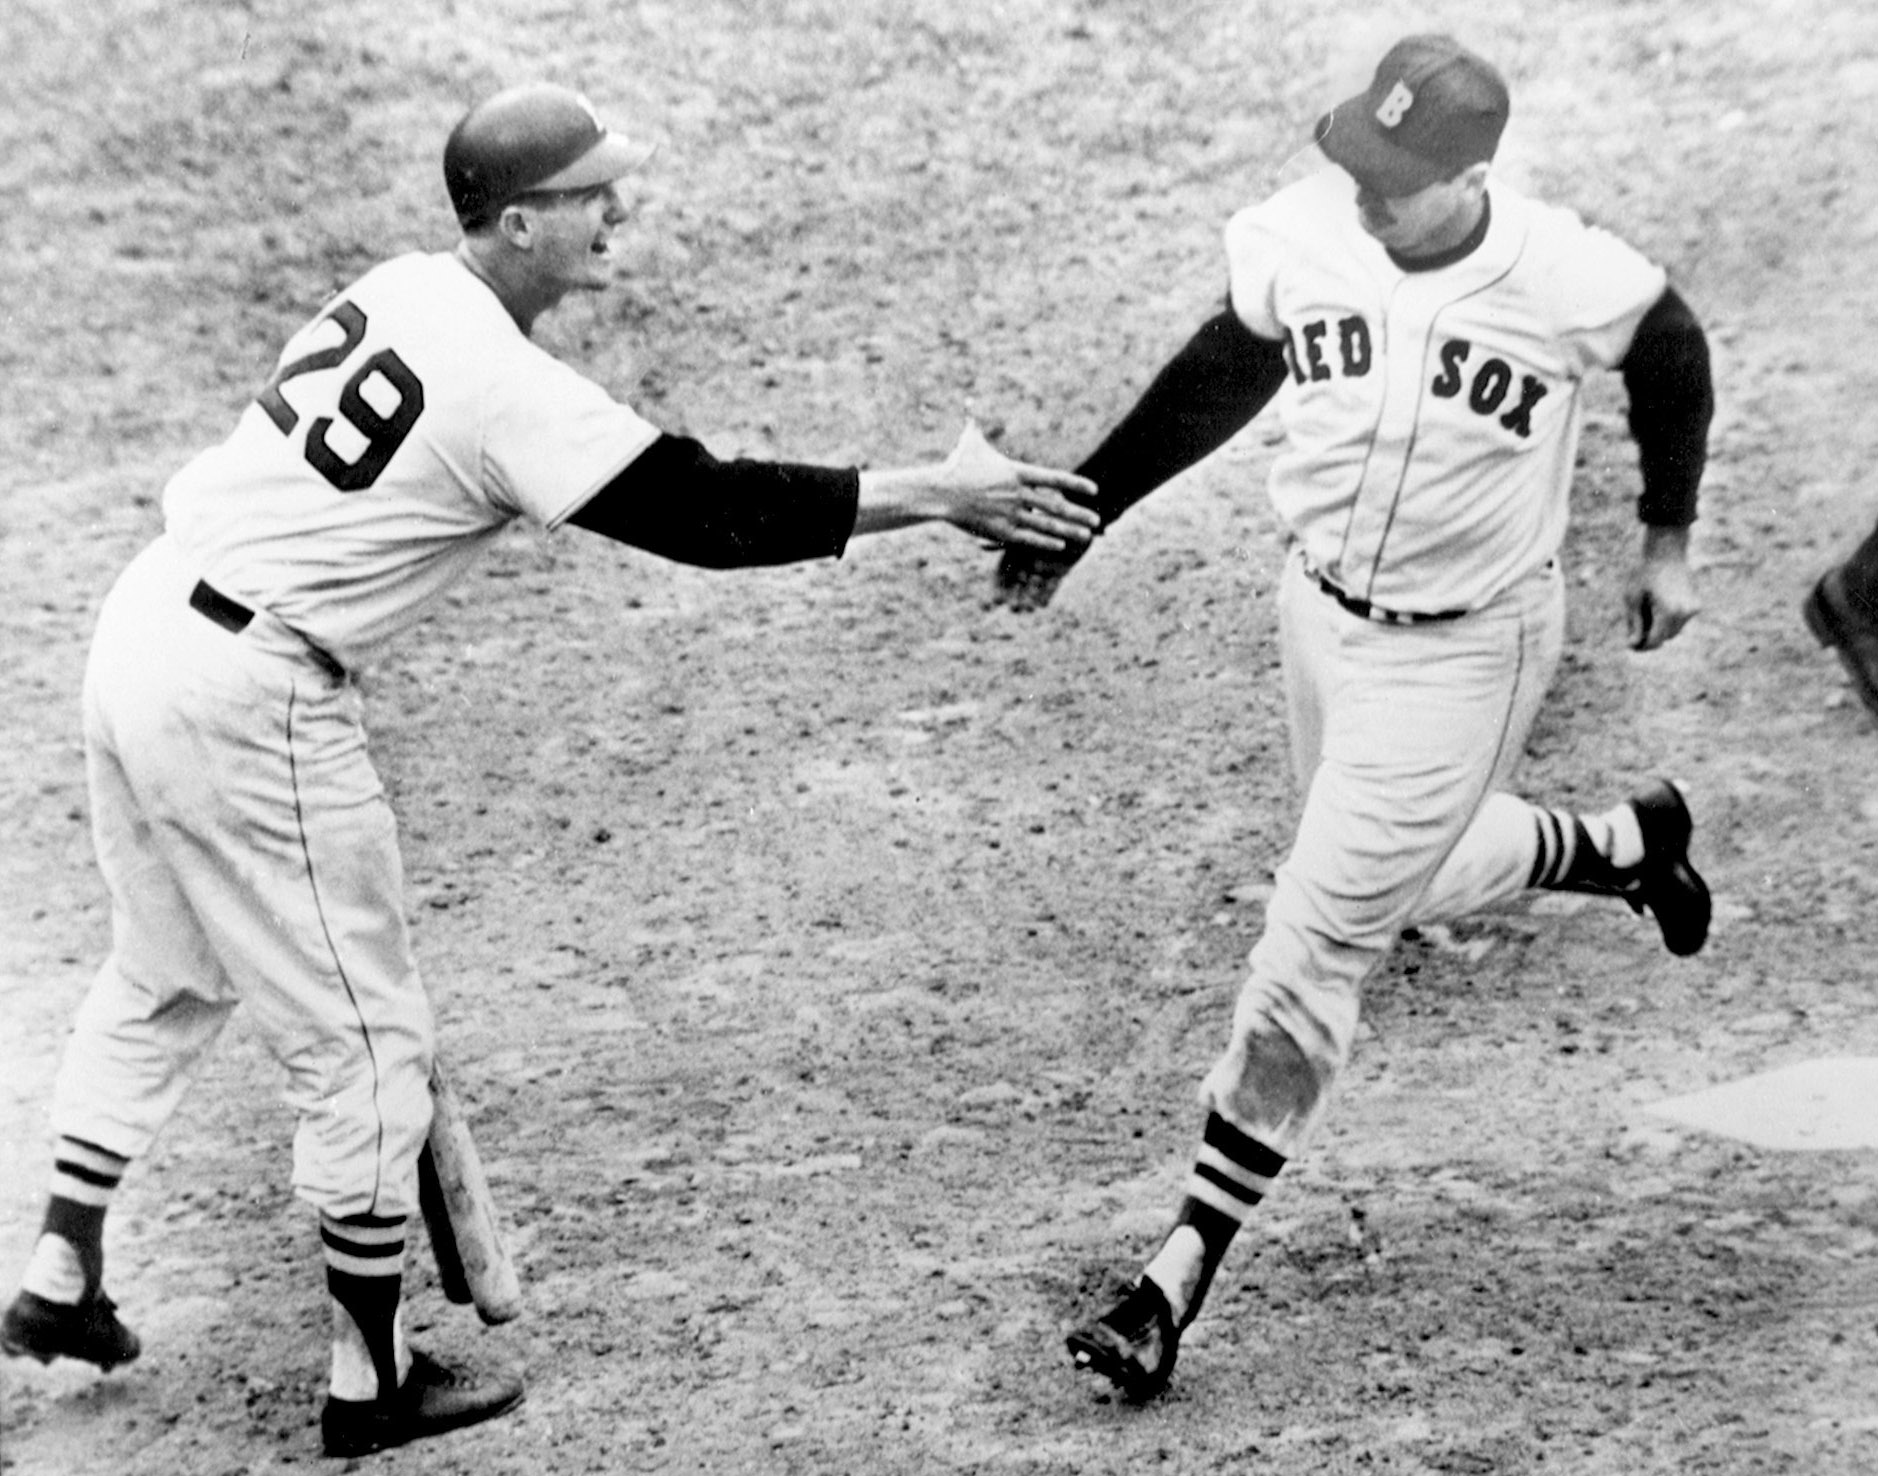 Ted Williams Hits 500th Home Run 56 Years Ago Today!